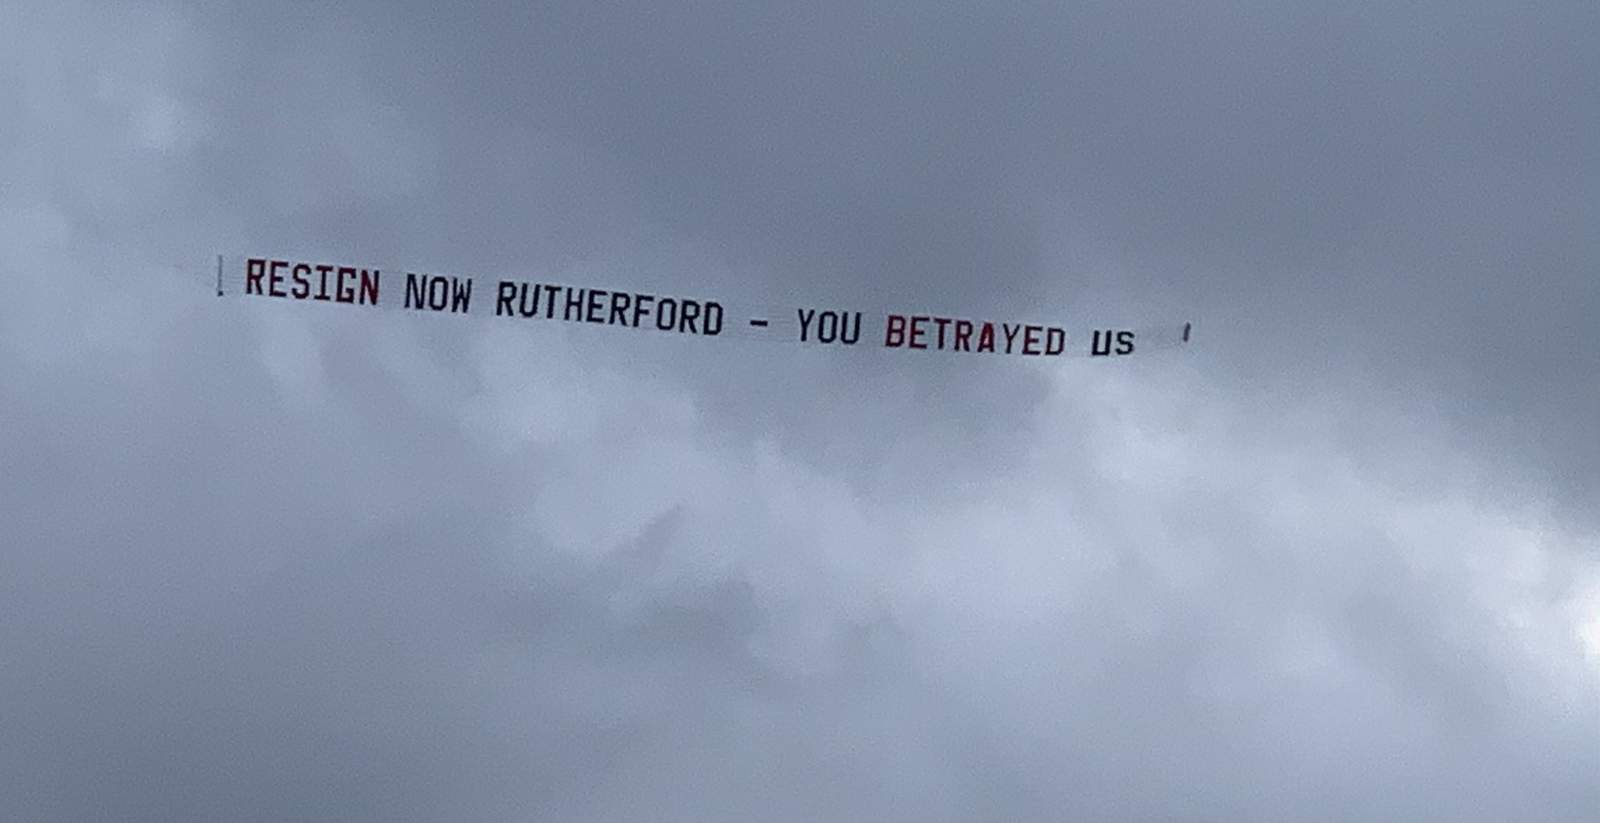 Aerial banner calls for Rutherford’s resignation